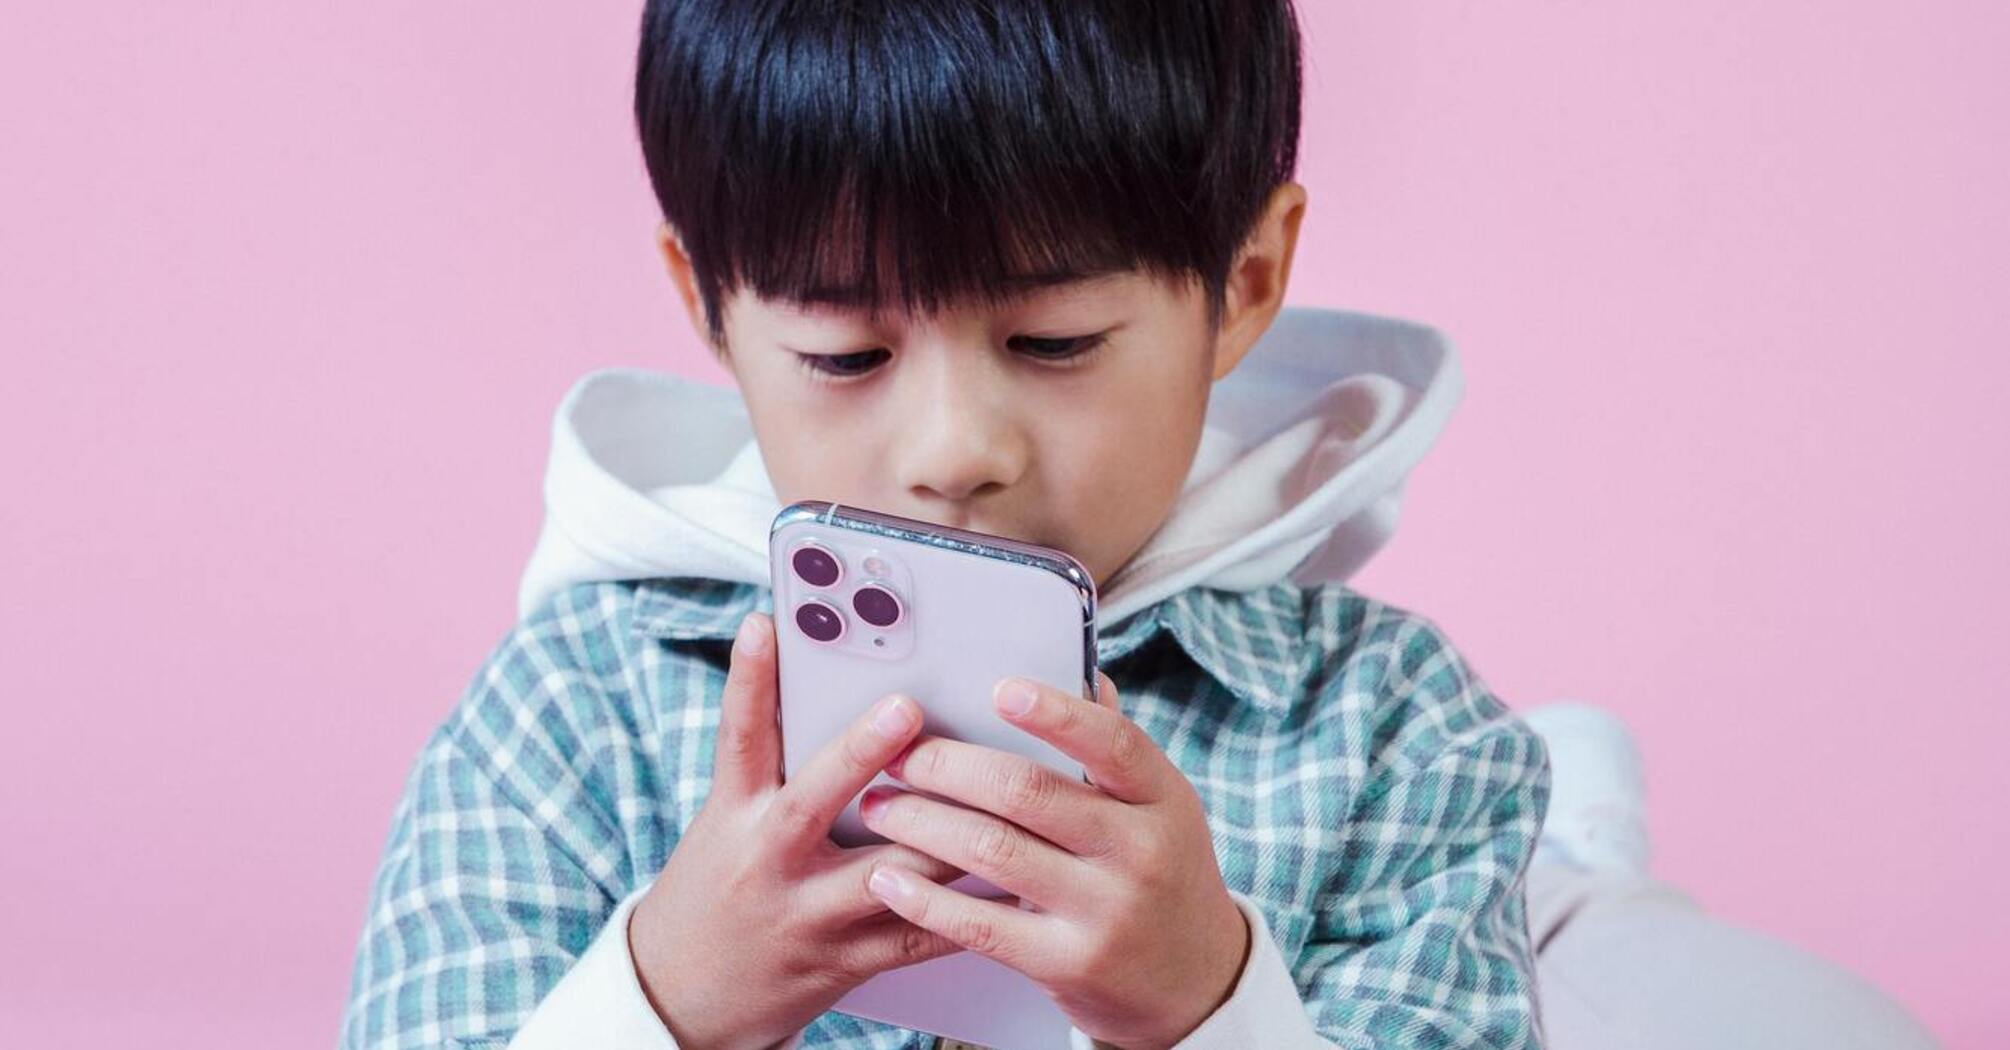 How to protect children who spend days online